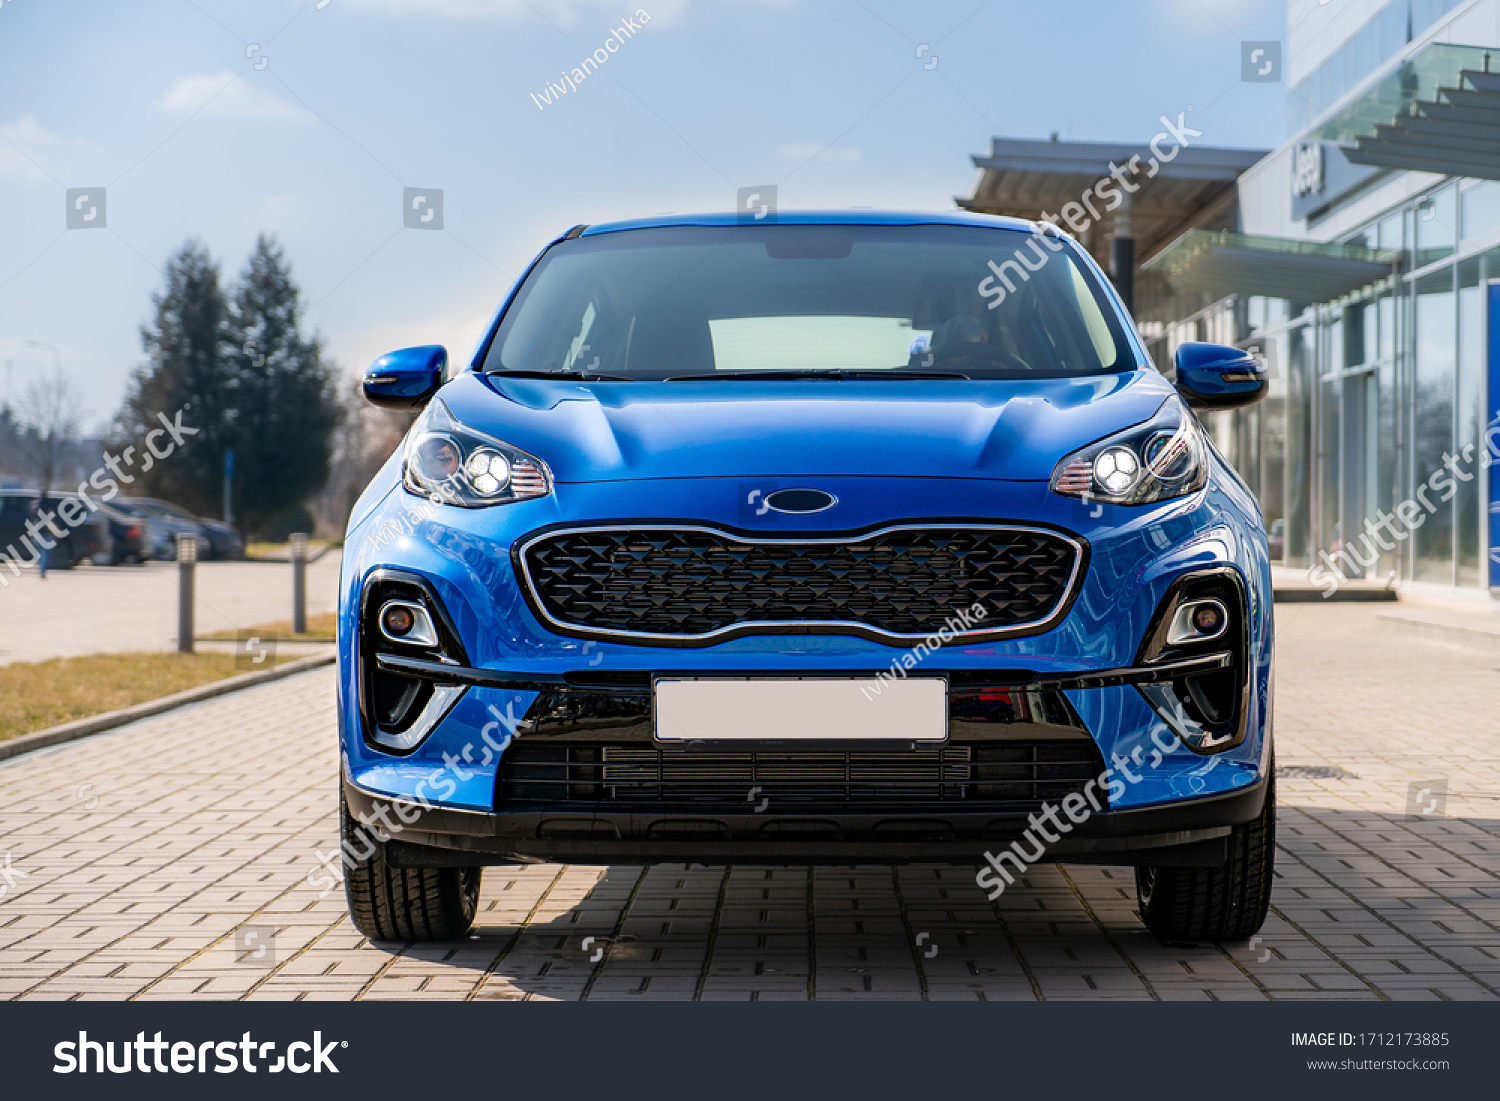 Blue business car with shiny front lights color bright #1712173885